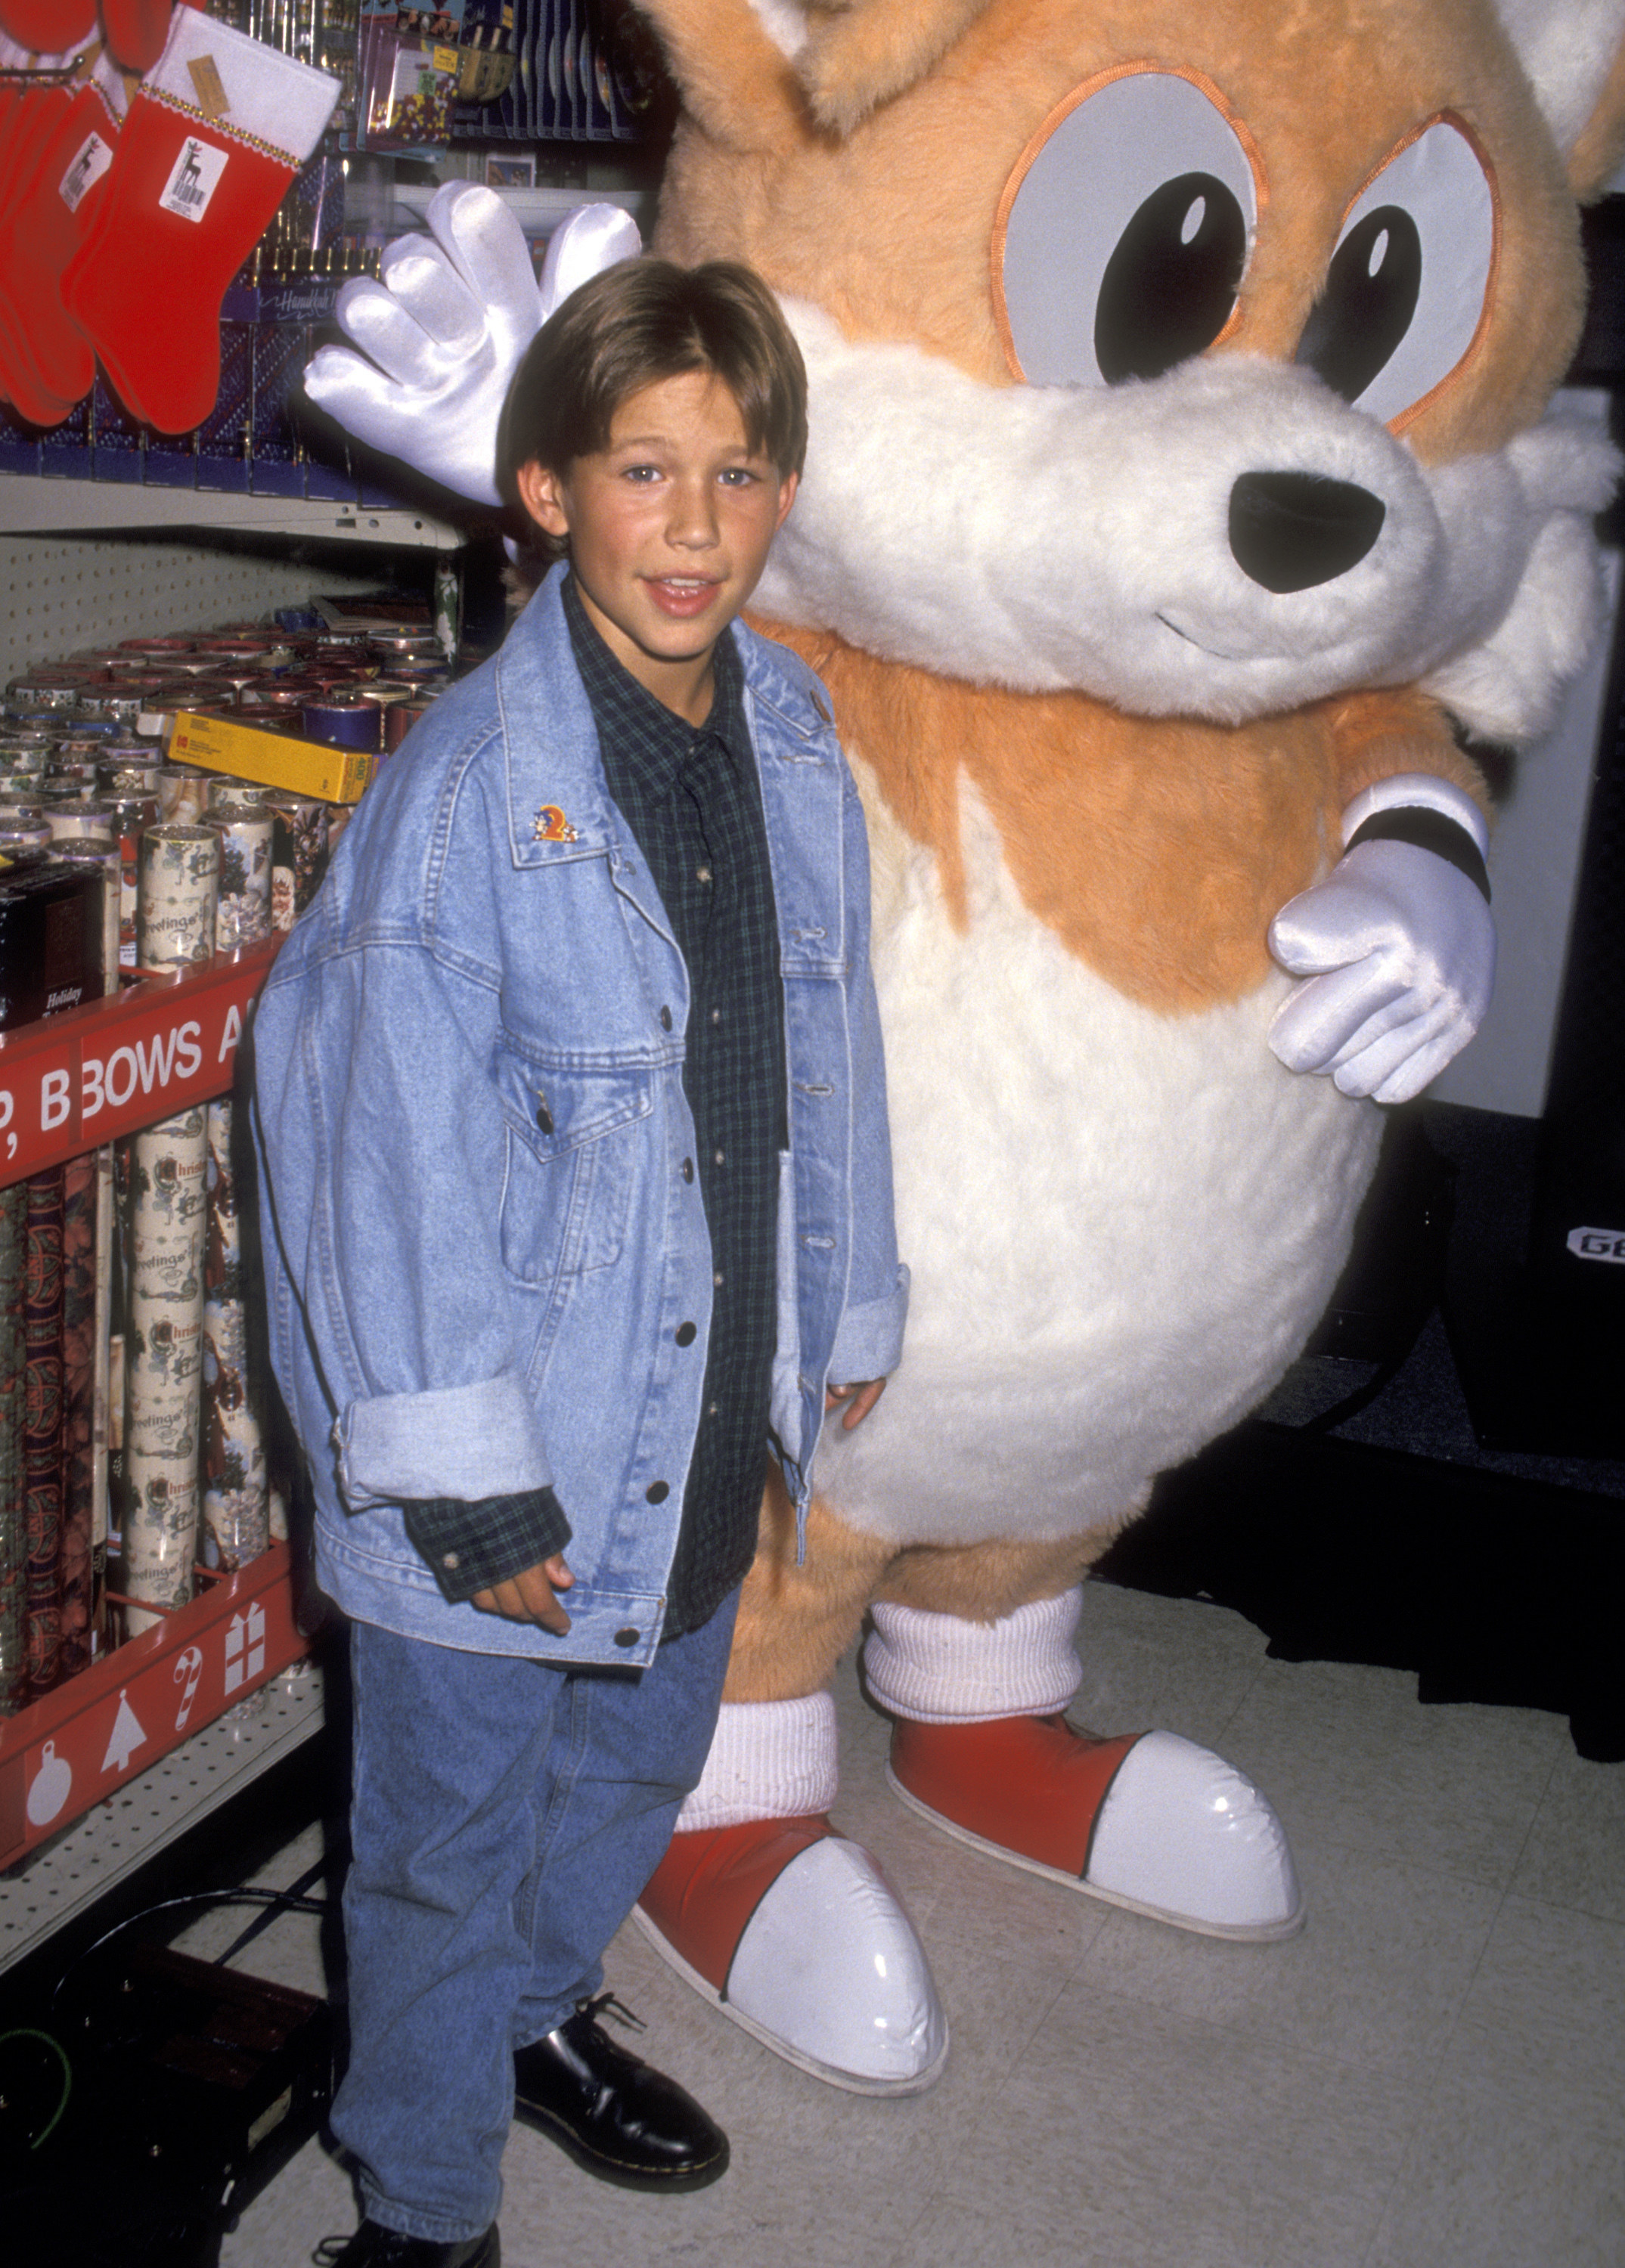 JTT standing next to a person in a Tails costume